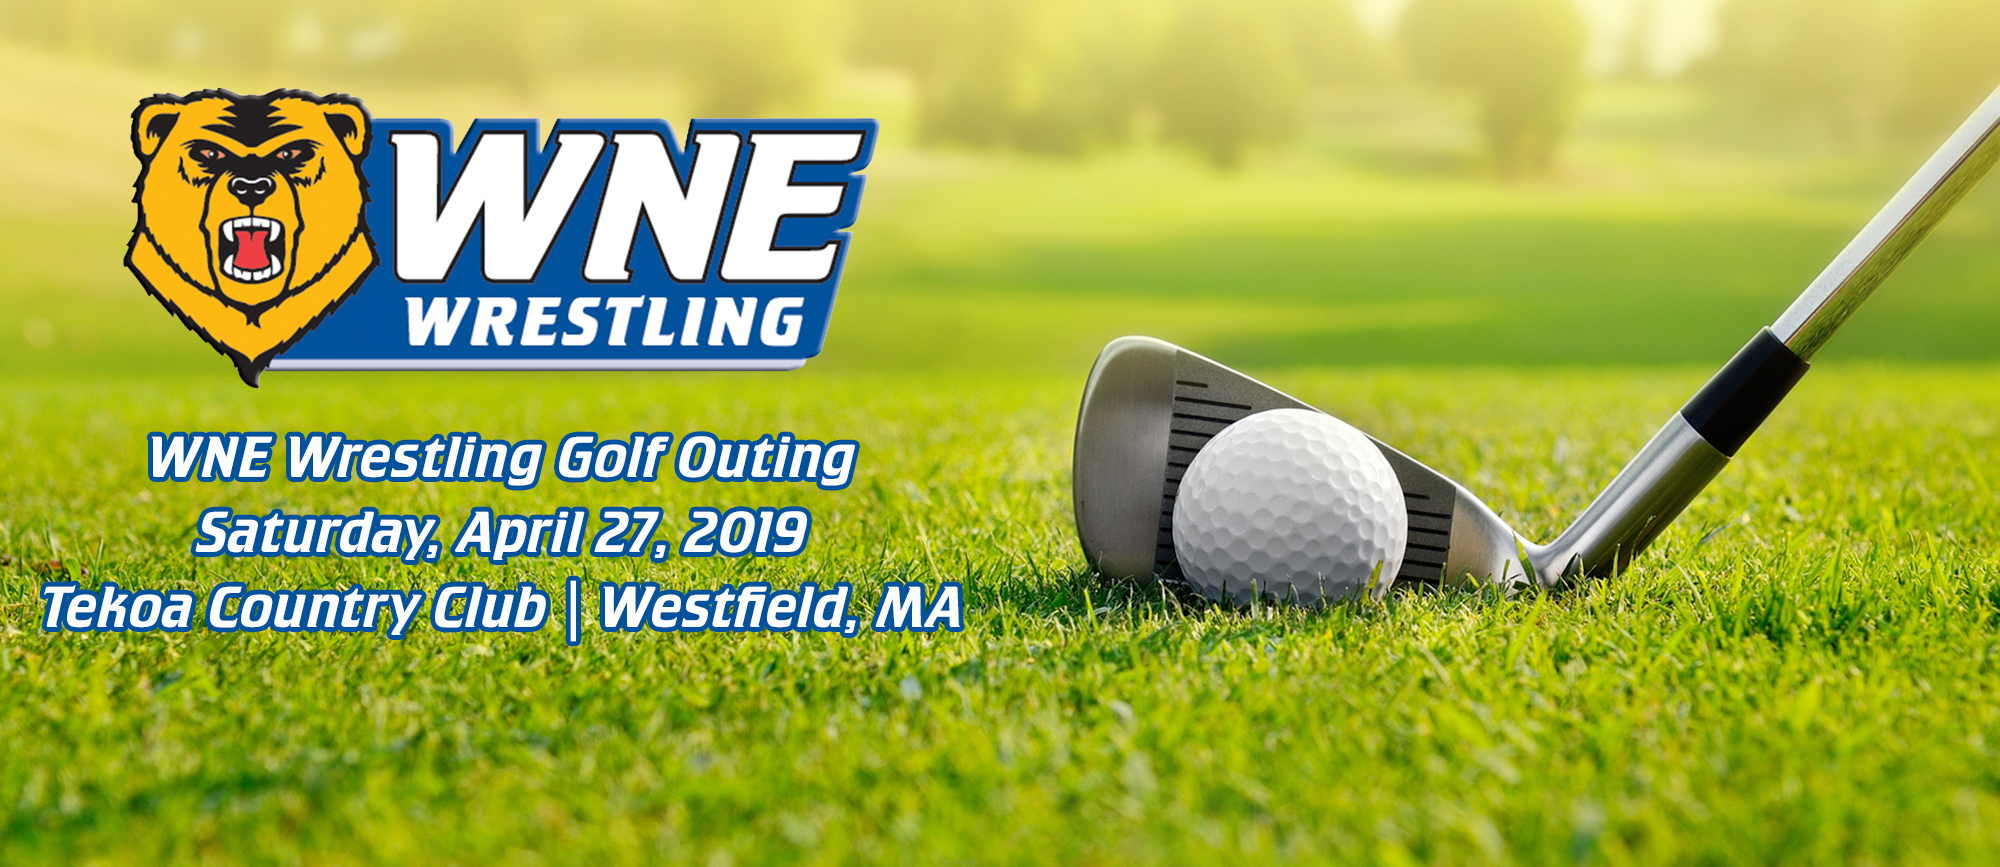 Registration Now Open for WNE Wrestling's Annual Golf Outing on Saturday, April 27